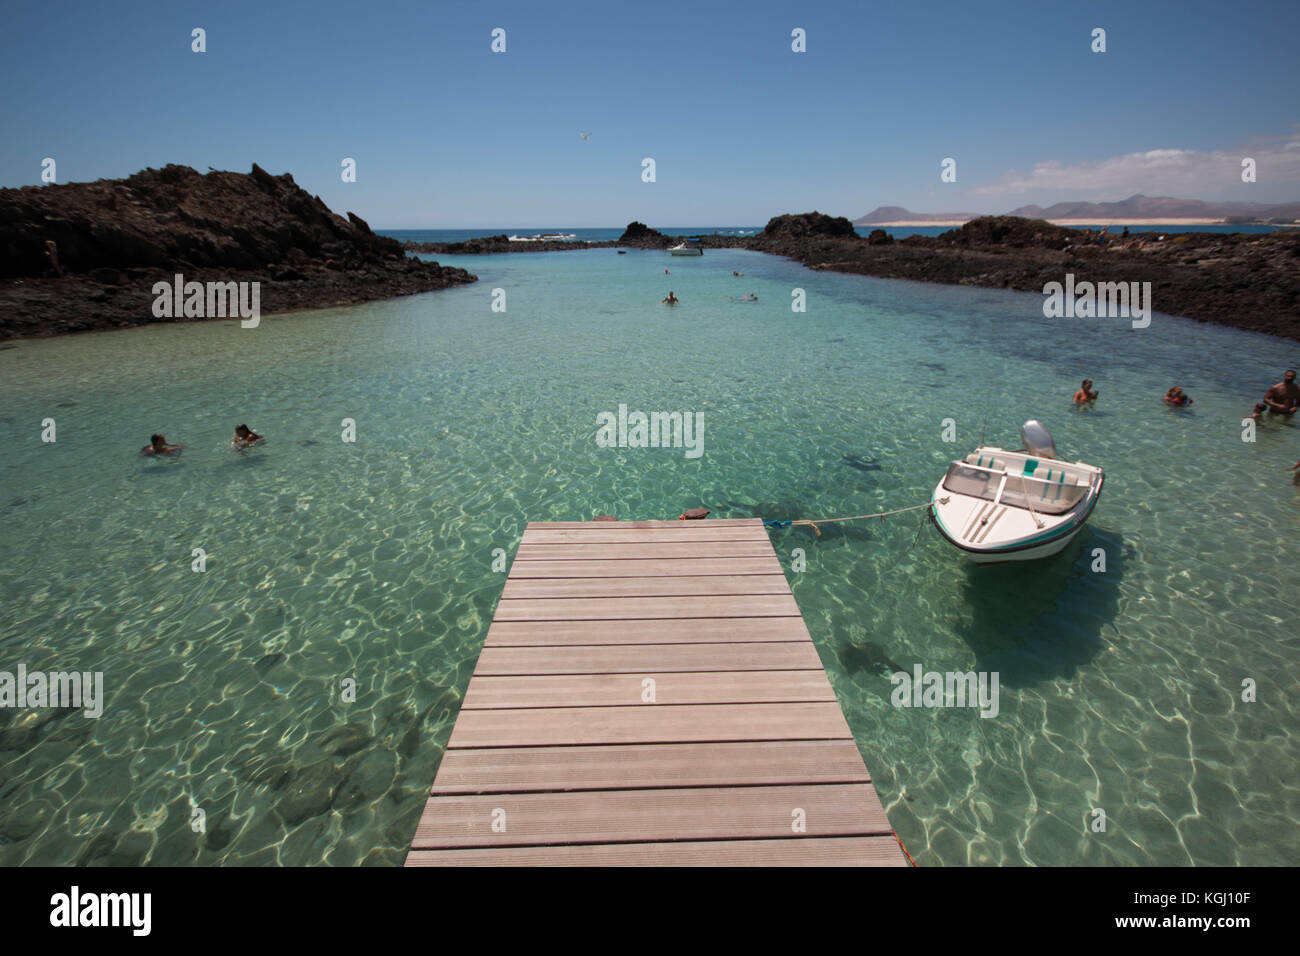 Overlook view from the dock of Los Lobos Islet, with people swimming in the transparent waters. Fuerteventura, Spain. Stock Photo